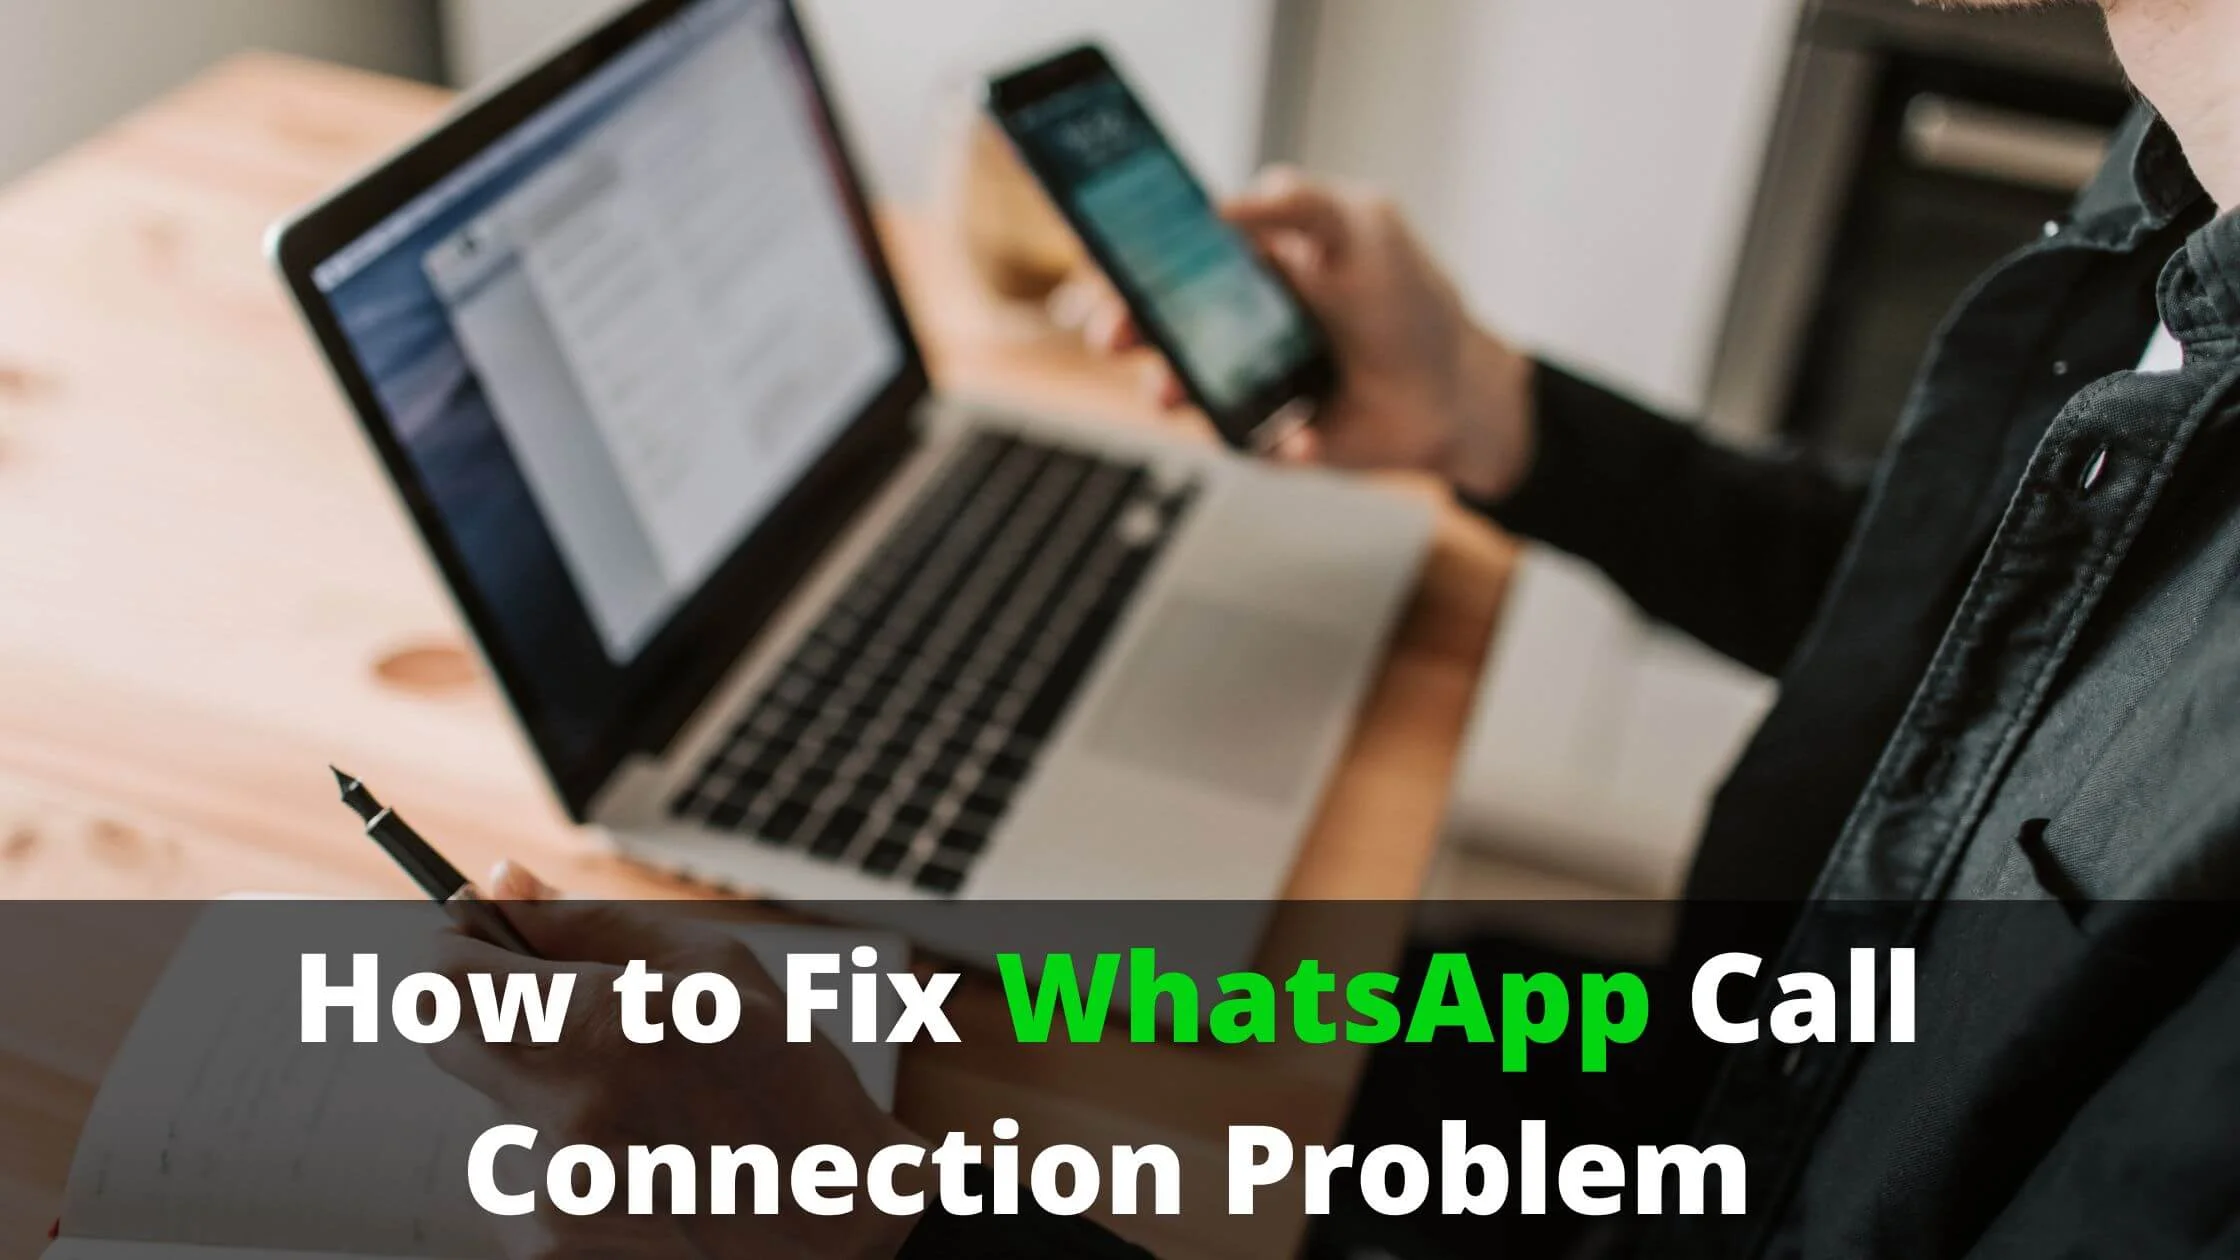 WhatsApp Call Connection Problem